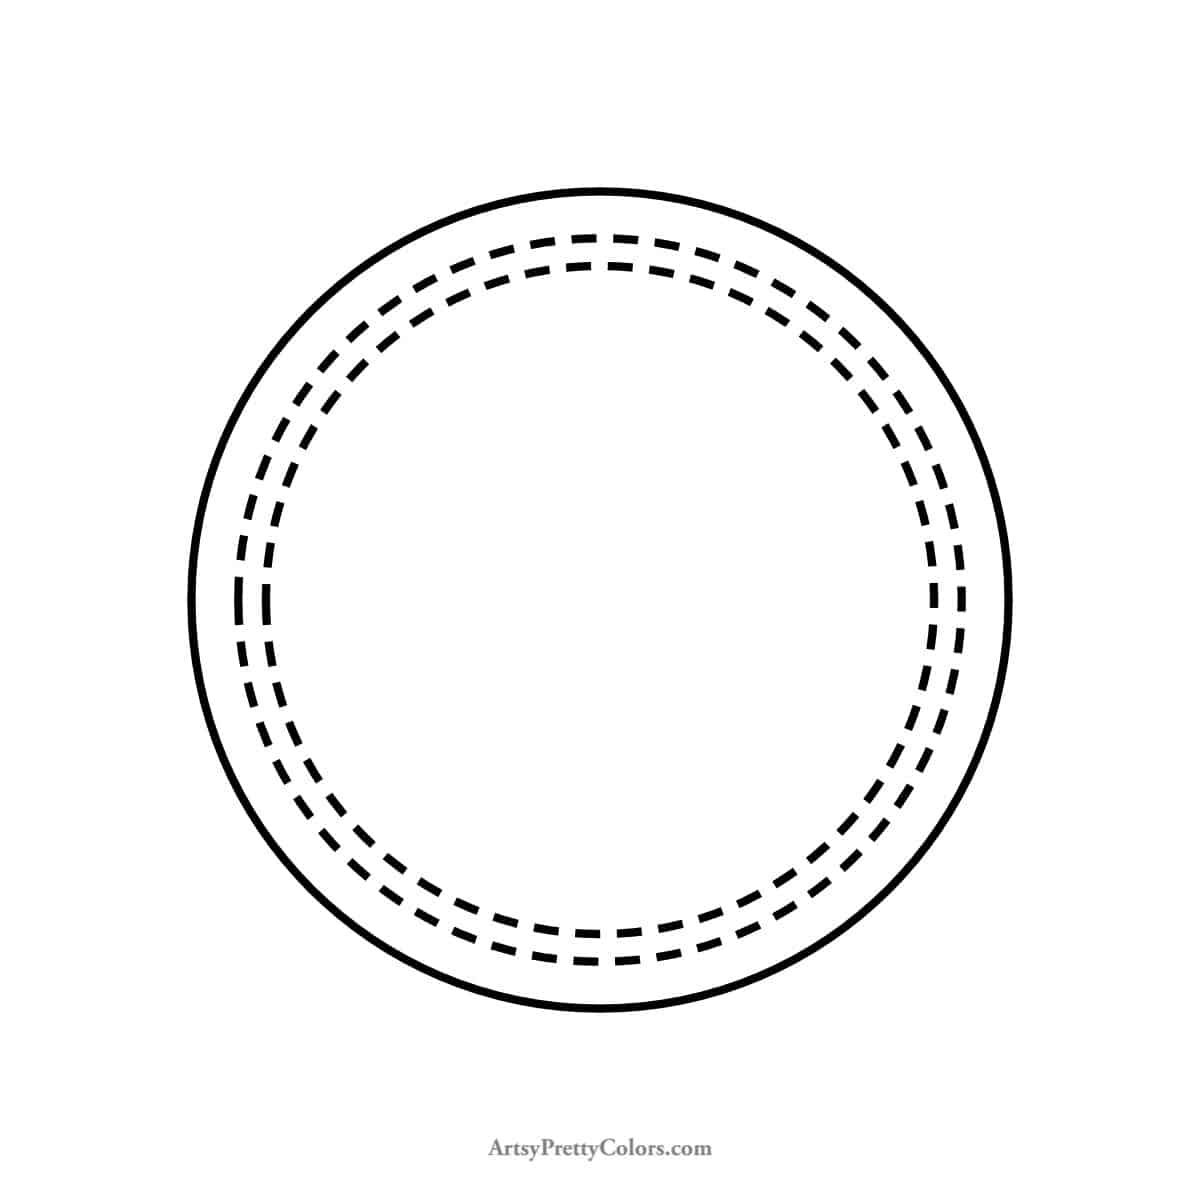 two dotted circles drawn inside a circle